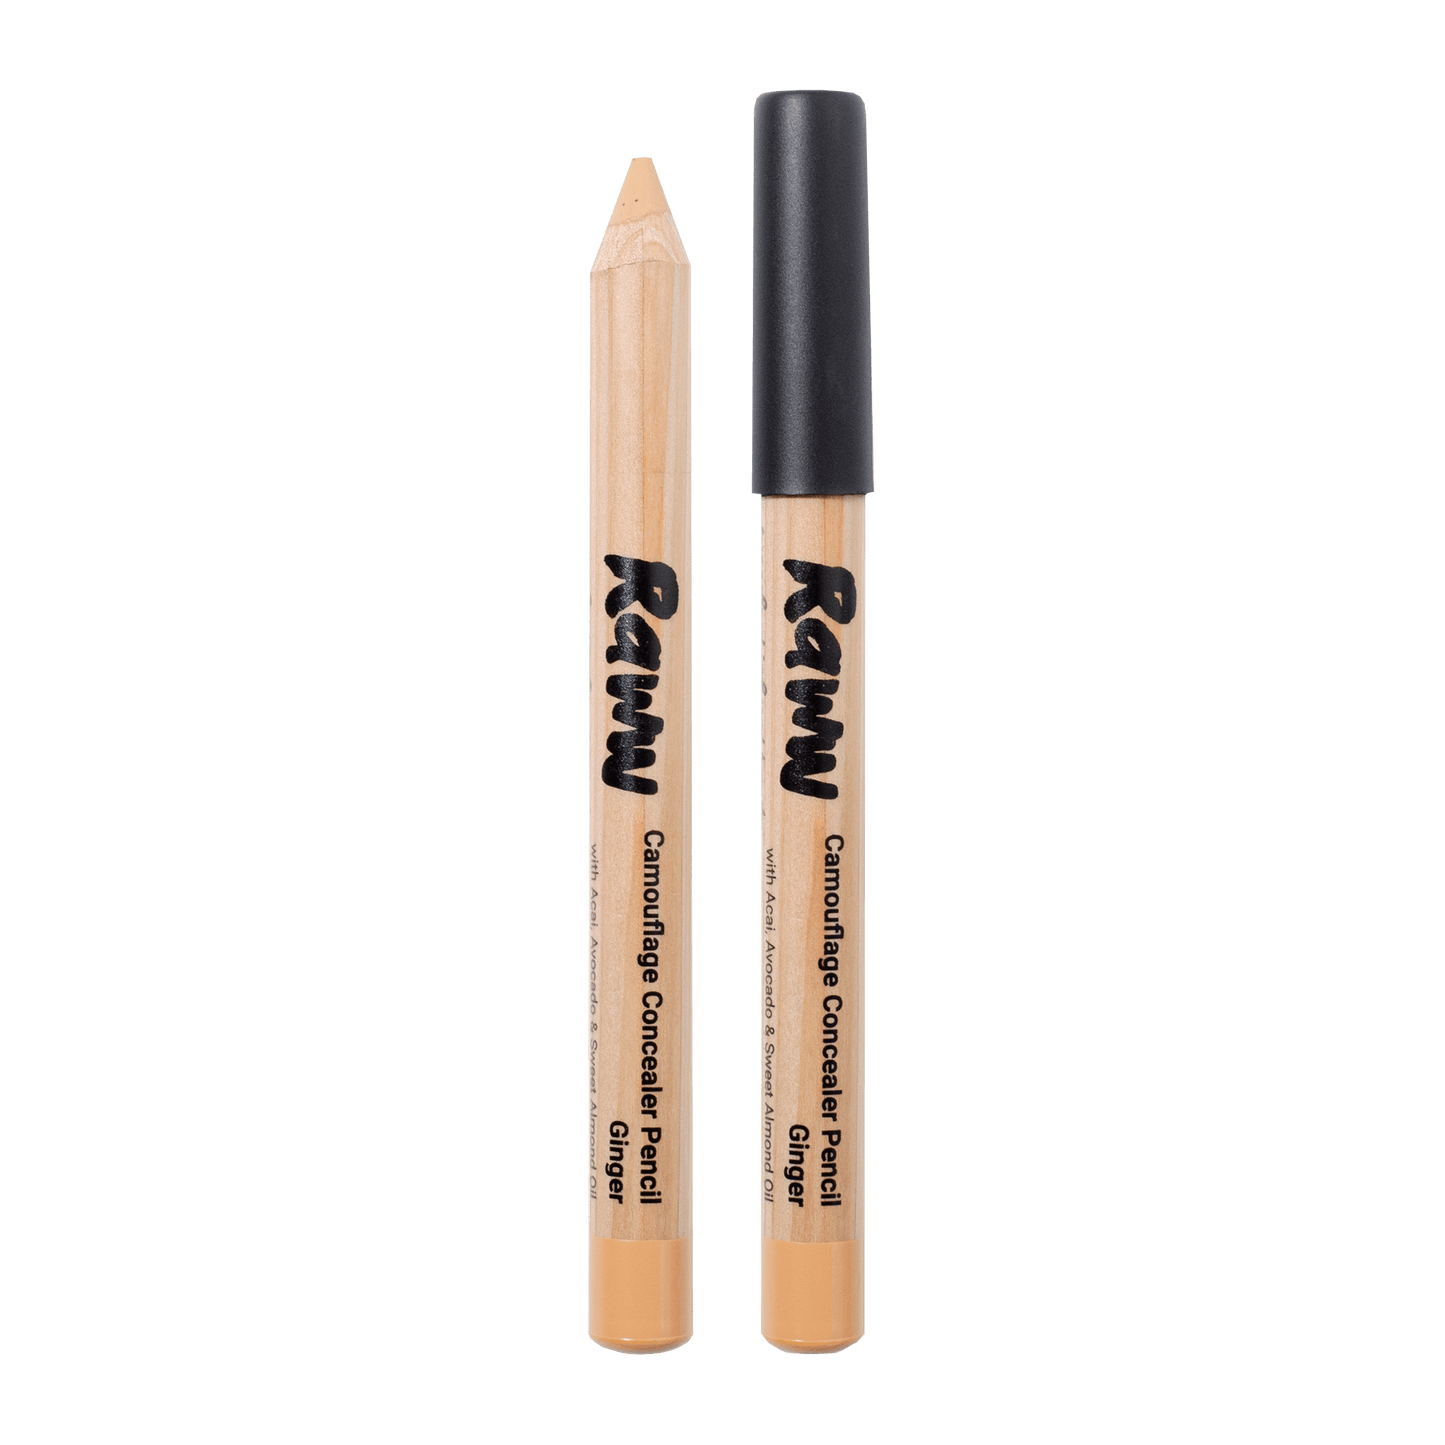 Camouflage Concealer Pencil (Ginger) | RAWW Cosmetics | 01